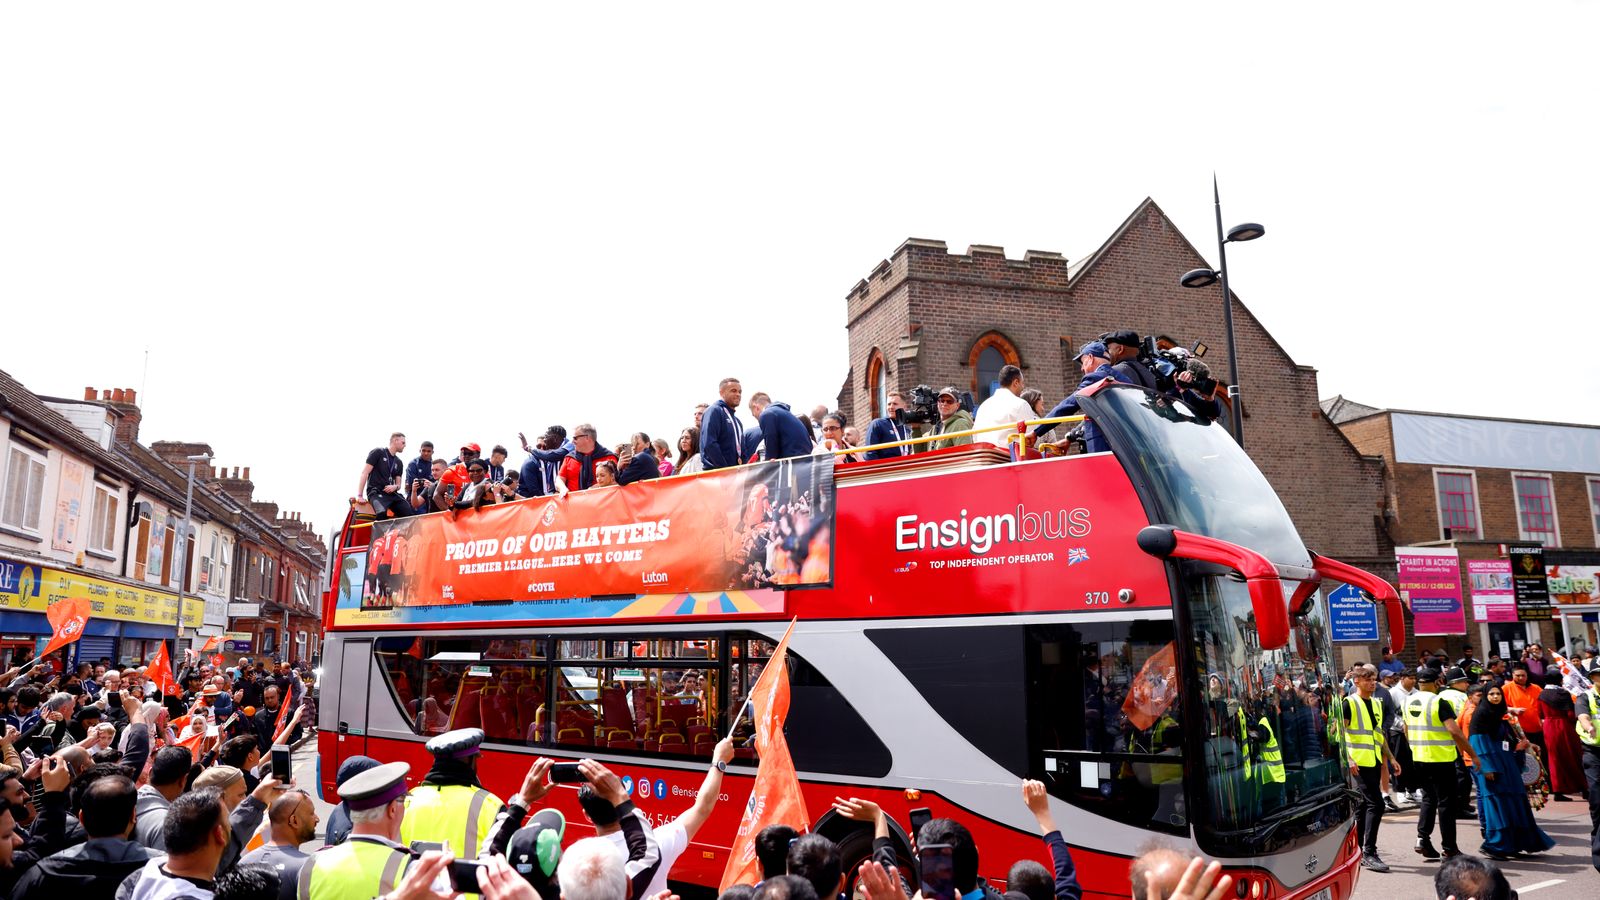 Luton Town celebrate historic rise to Premier League with huge crowds at bus parade | UK News